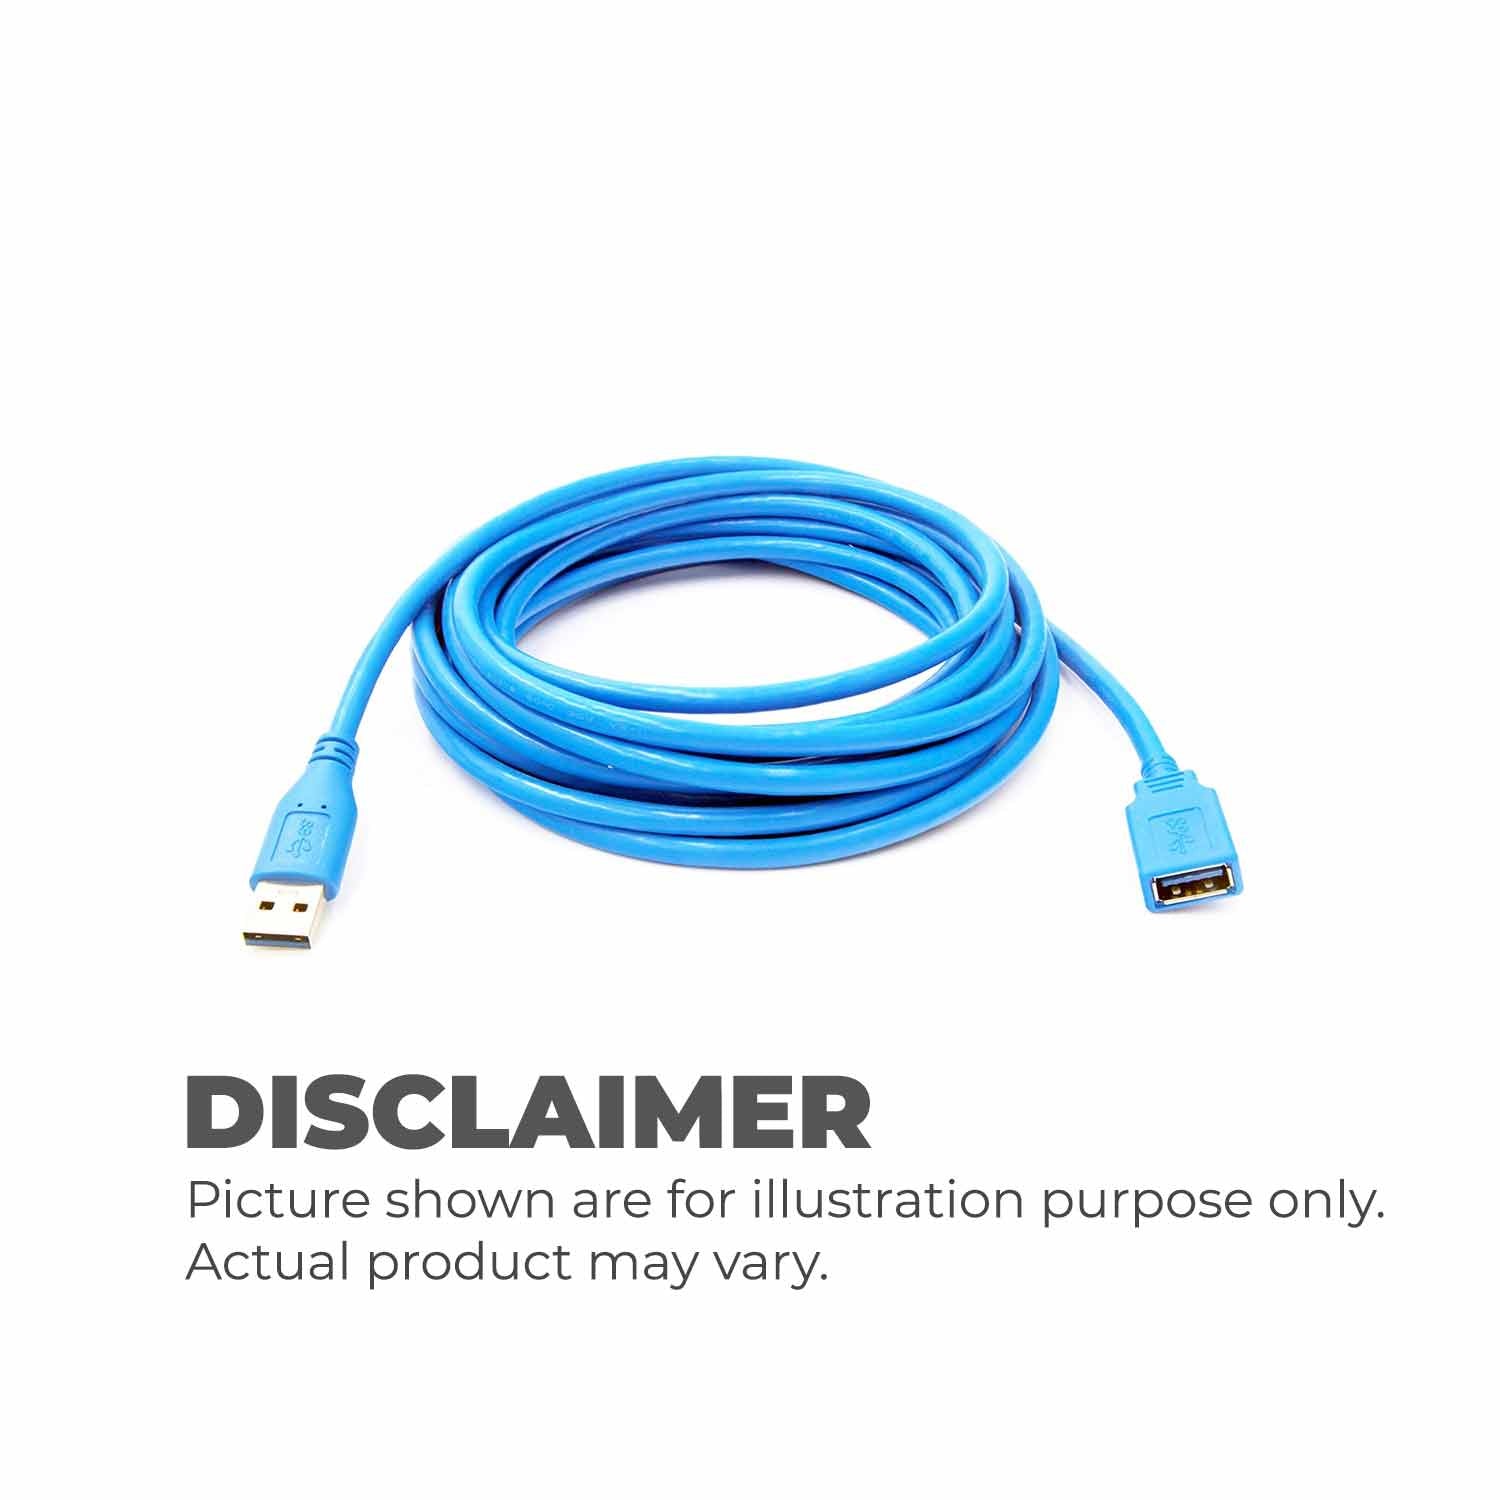 Printer USB Extension Cable/ 5m